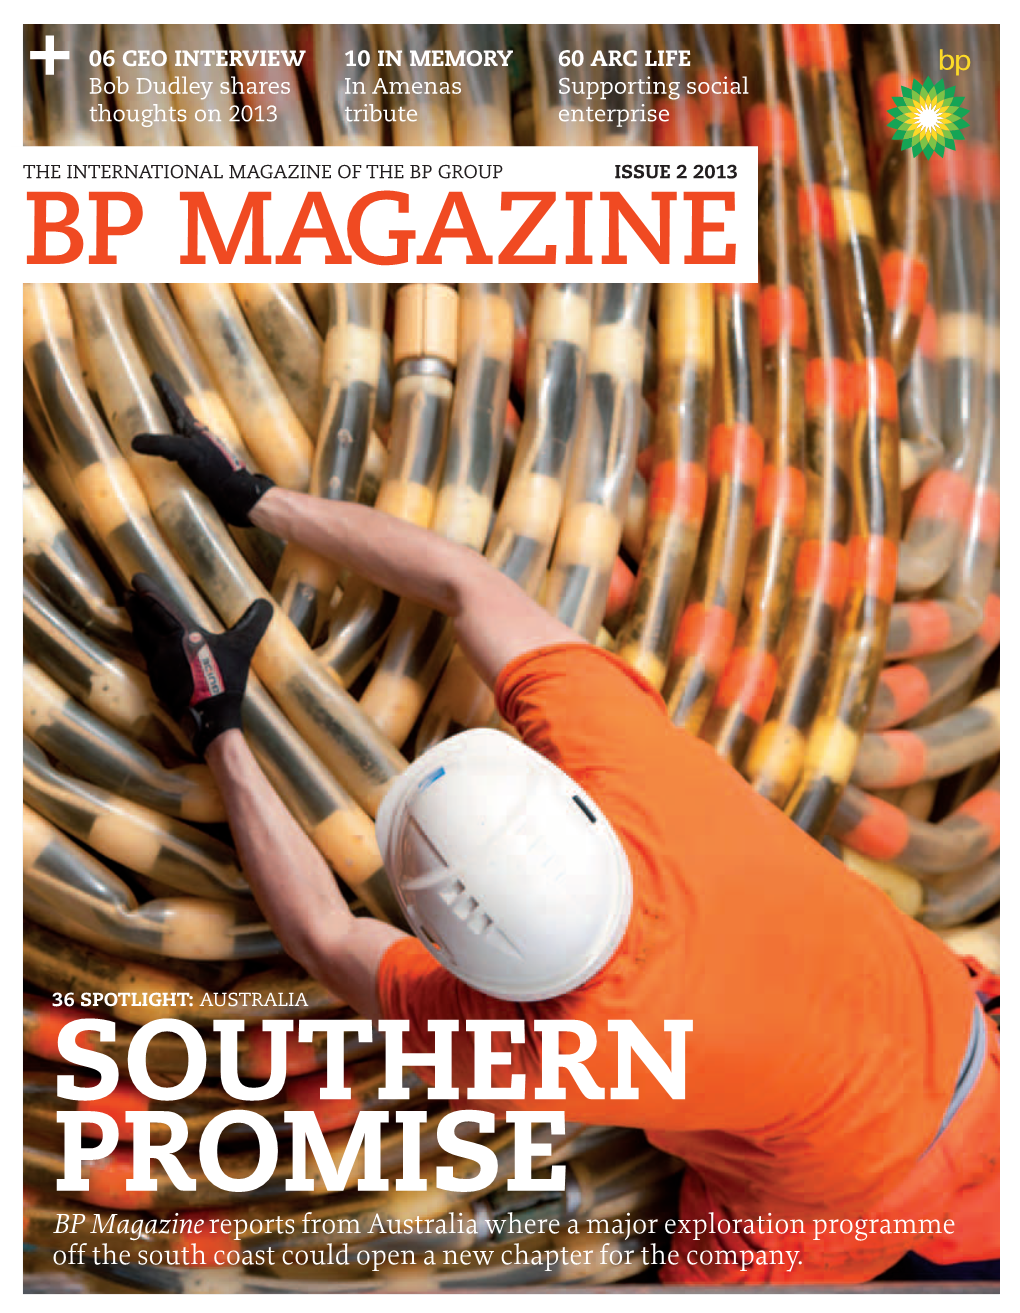 SOUTHERN PROMISE BP Magazine Reports from Australia Where a Major Exploration Programme Off the South Coast Could Open a New Chapter for the Company